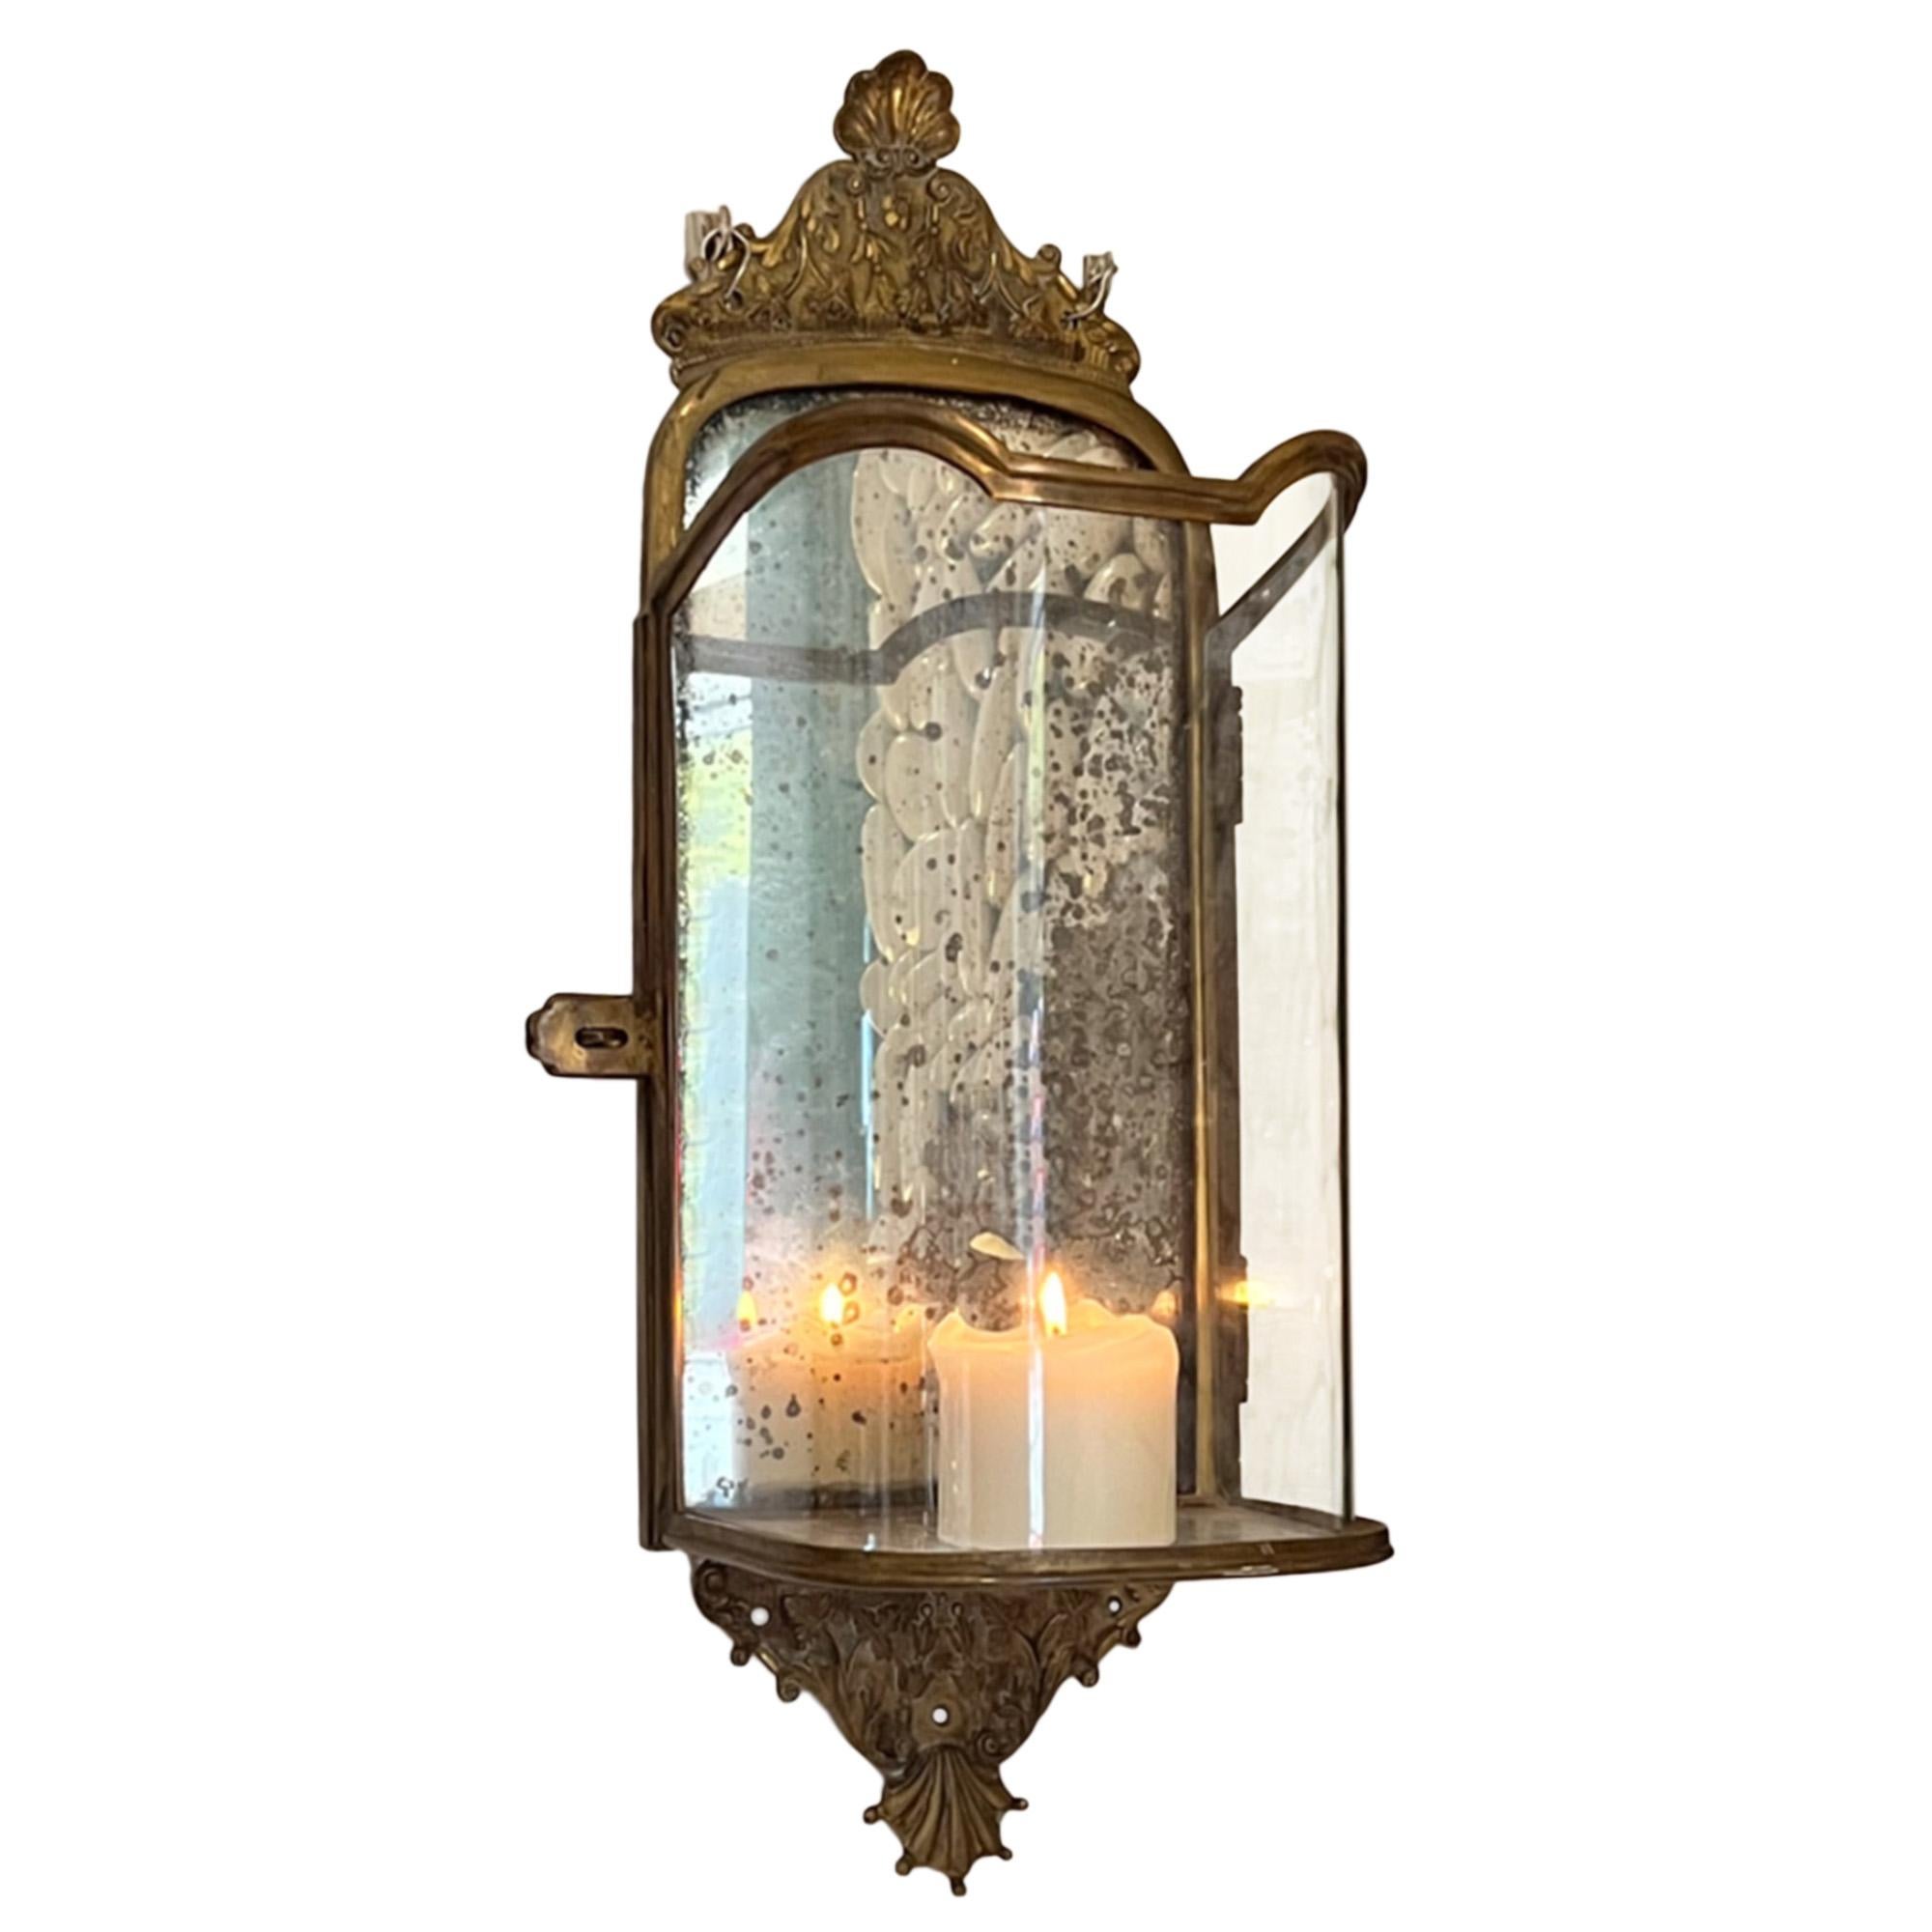 This stunning pair of wall lanterns were made in France in the 1950s. Made in an antique style with the original eglomise glass backs. A really elegant design with the curved glass fronts. 

As you can see, we've just added simple cream candles